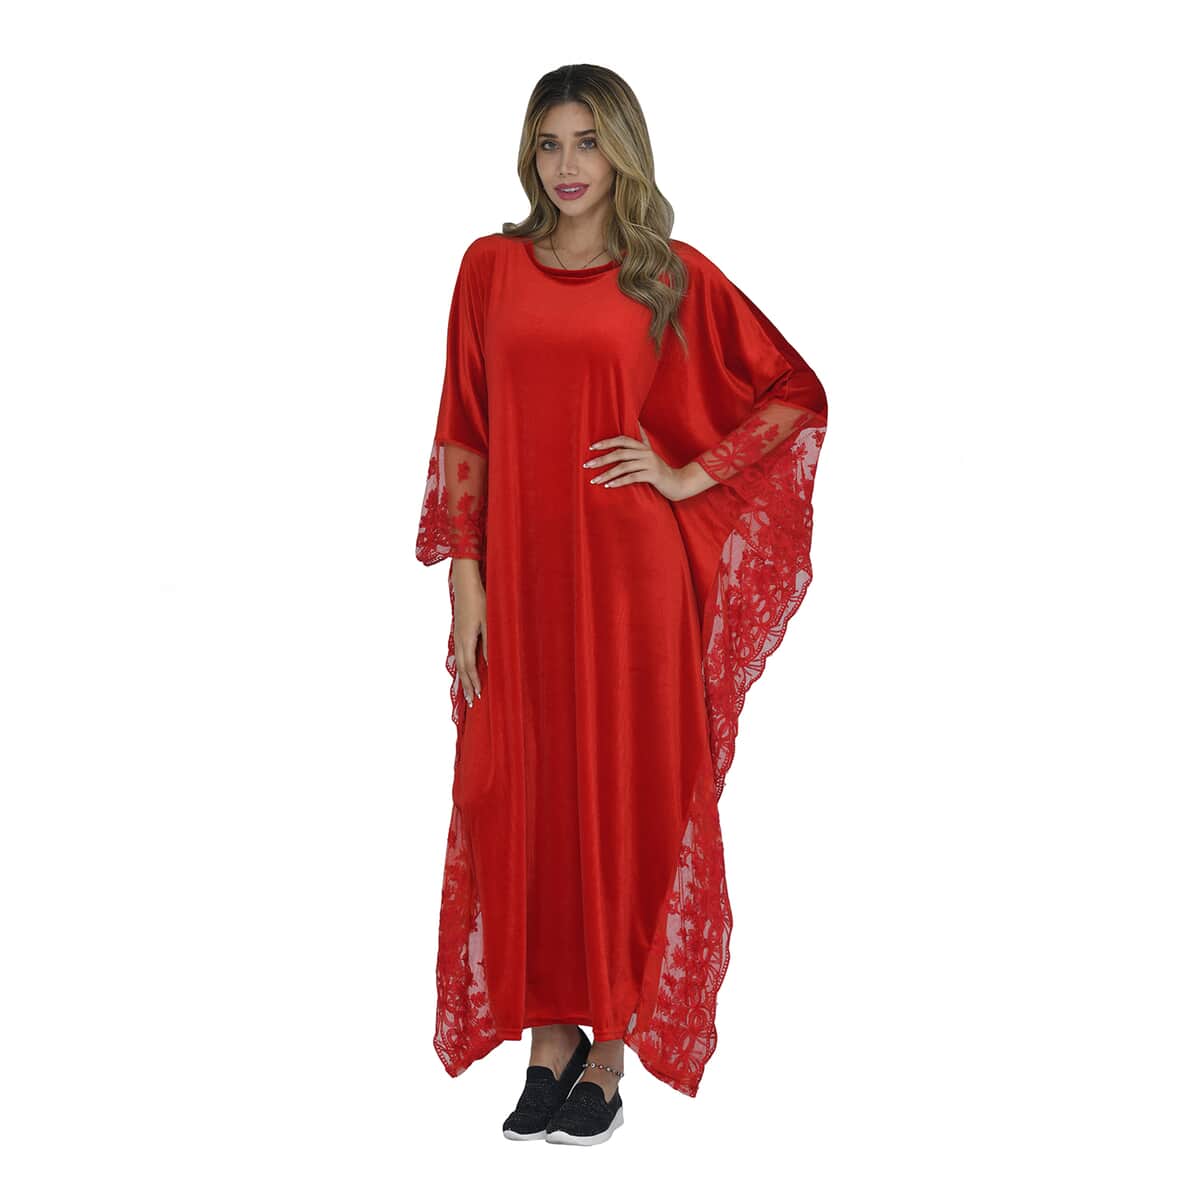 Tamsy Black Label - Lux Stretch Velvet Kaftan with Lace in Red - One Size Fits Most image number 0